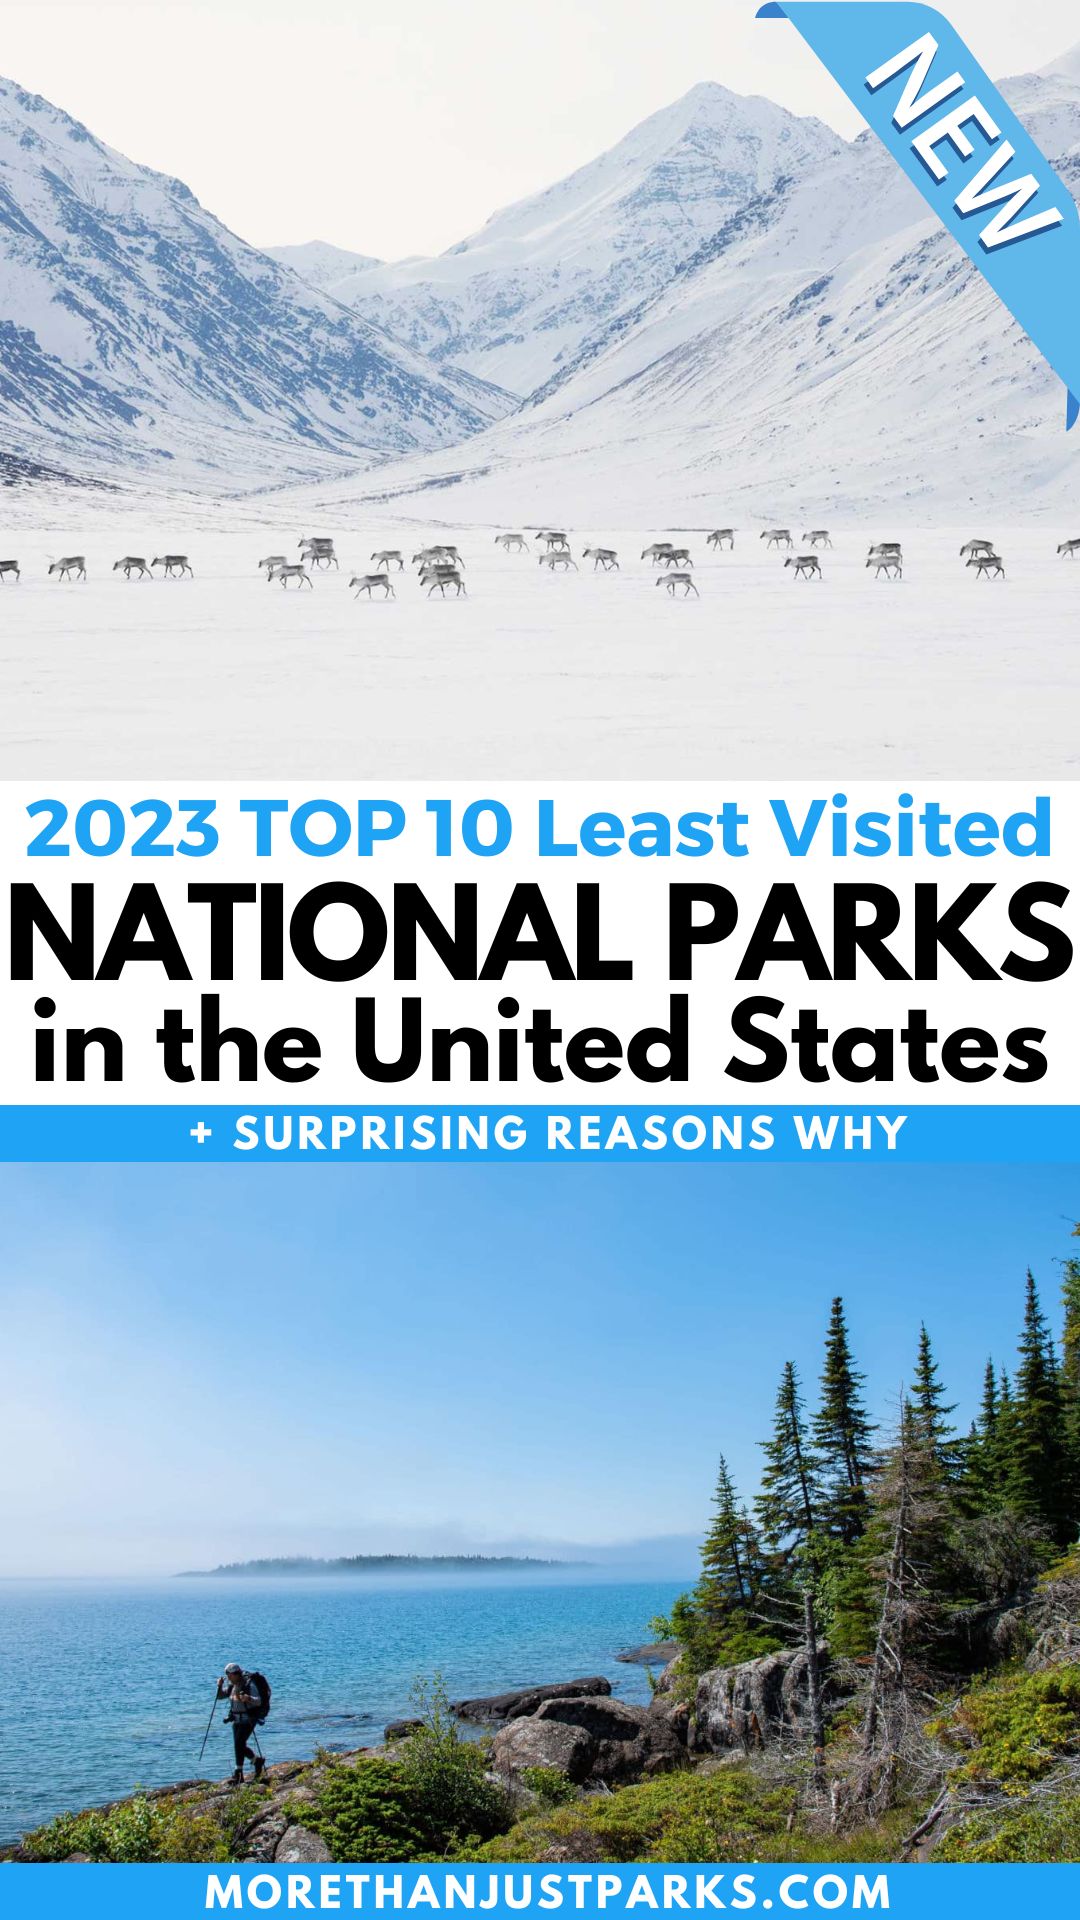 Least Visited National Parks Graphic